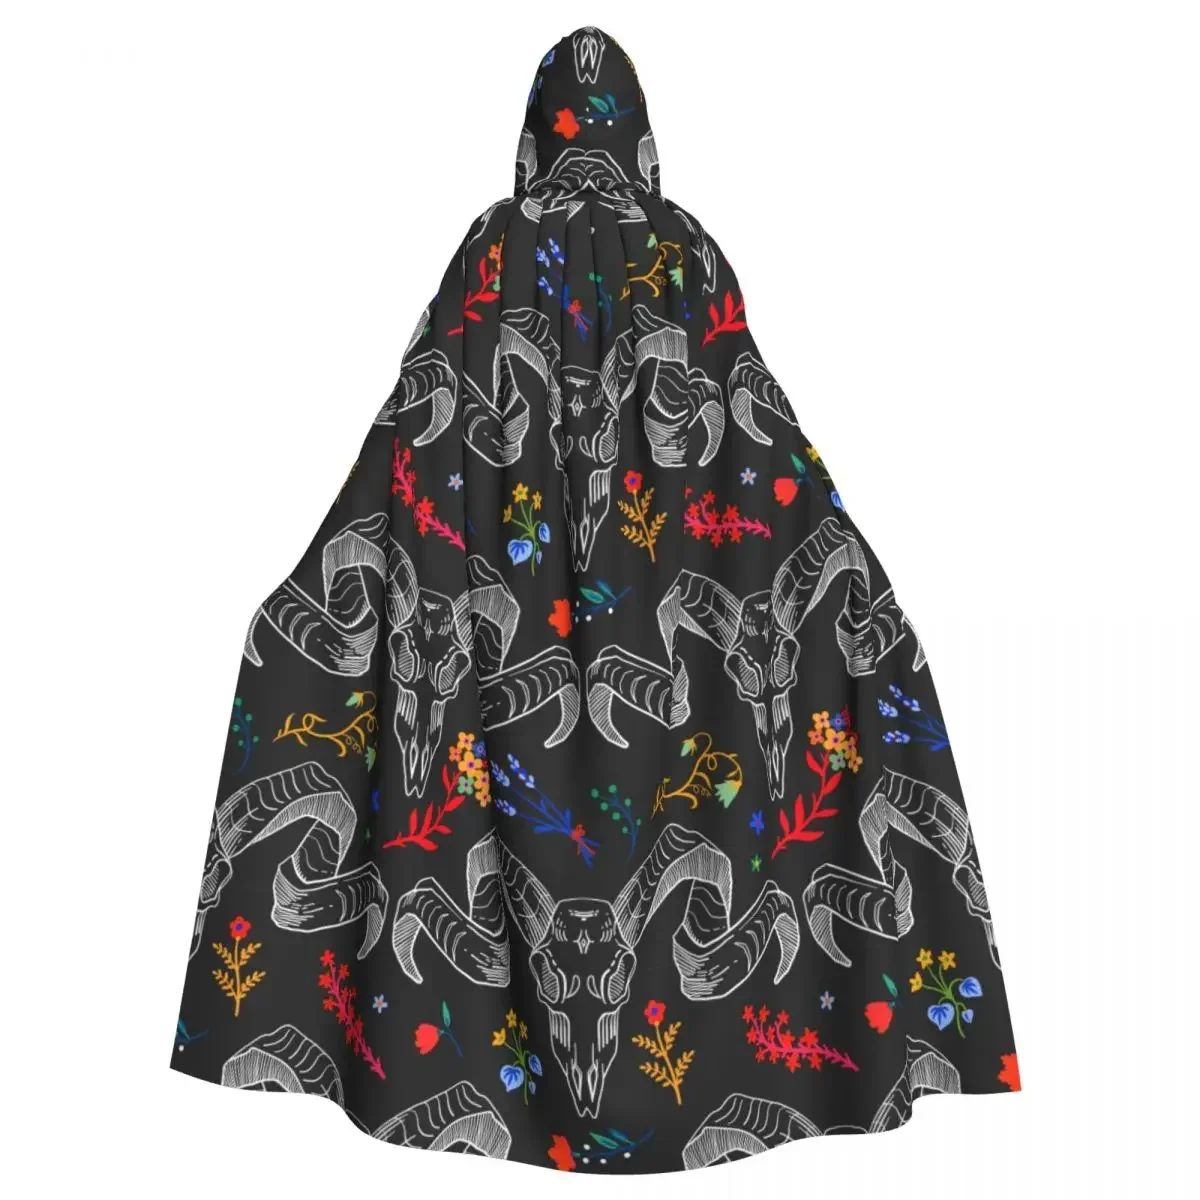 

Hooded Cloak Polyester Unisex Witch Cape Costume AccessorySkull With Horns Among The Flowers